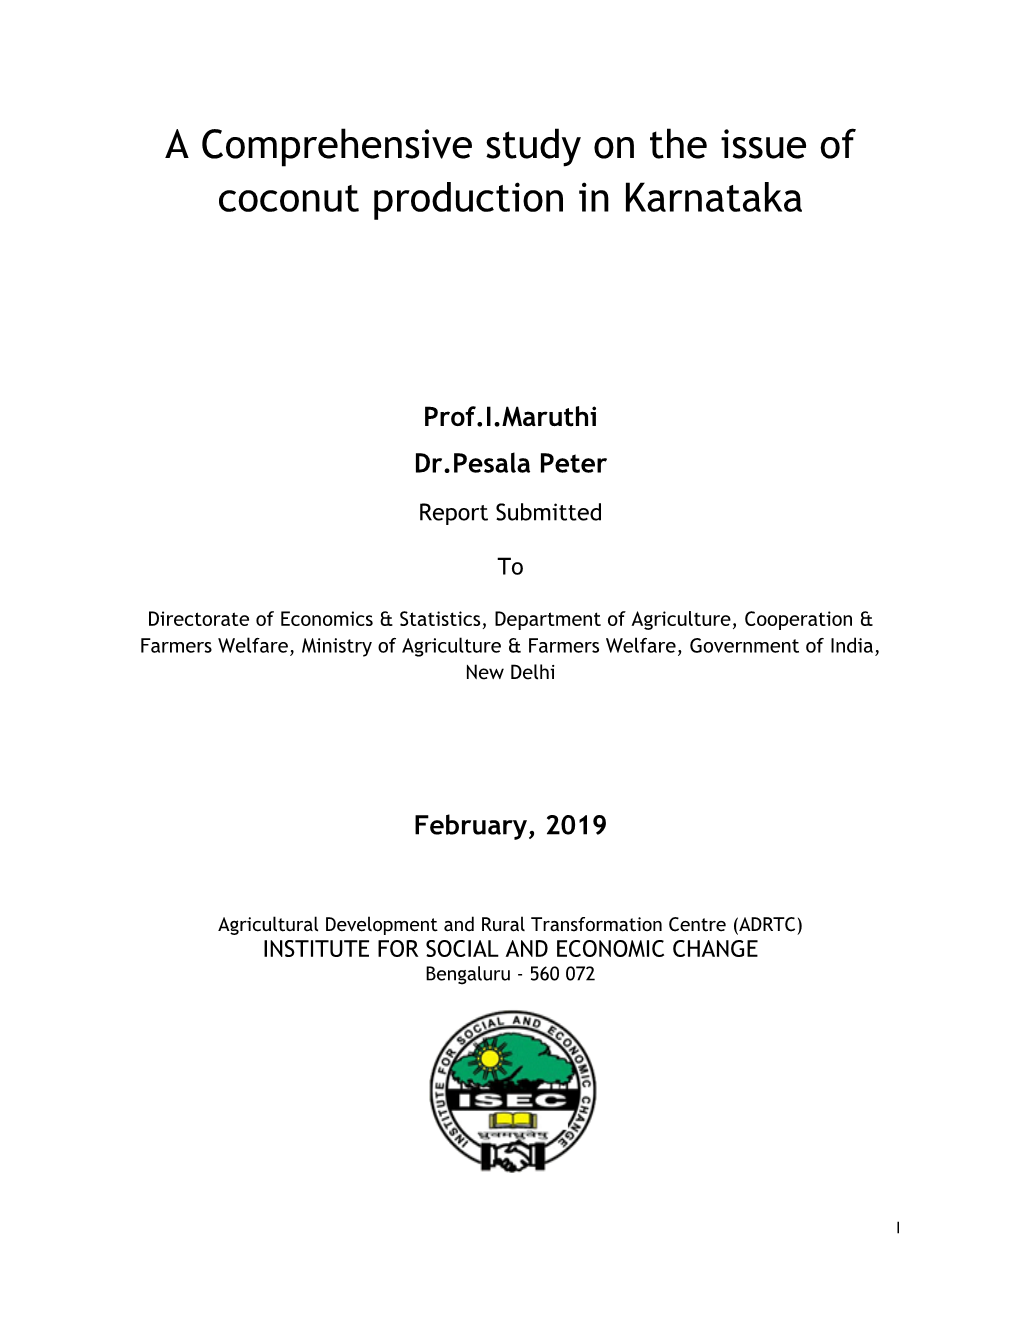 A Comprehensive Study on the Issue of Coconut Production in Karnataka